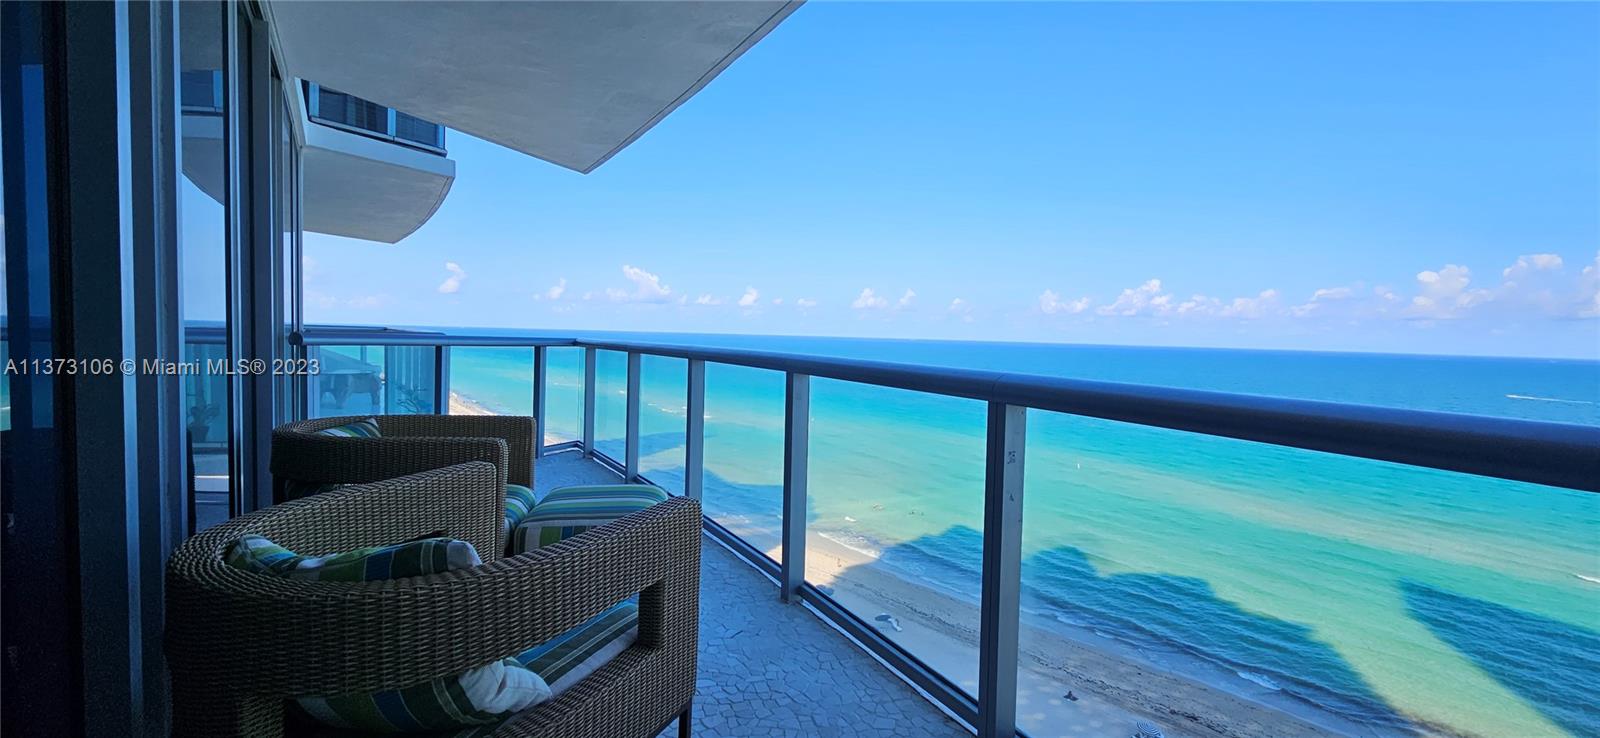 Wake up to mesmerizing direct ocean views in this totally upgraded 1 bedroom/1.5 bath residence at the luxurious Jade Beach. Foyer entry, marble floors, retractable glass wall, Snaidero Italian cabinetry, Miele/Subzero appliances, granite counters, custom closets, Lutron lighting, access to all building services; Amenities include oceanfront fitness center, full service spa, sunrise and sunset pools, jacuzzi, outdoor bar and café offering poolside, beach and in residence food and beverage service, full service beach club, conference room, media and game room, 24 hr. concierge, front desk, security and valet.